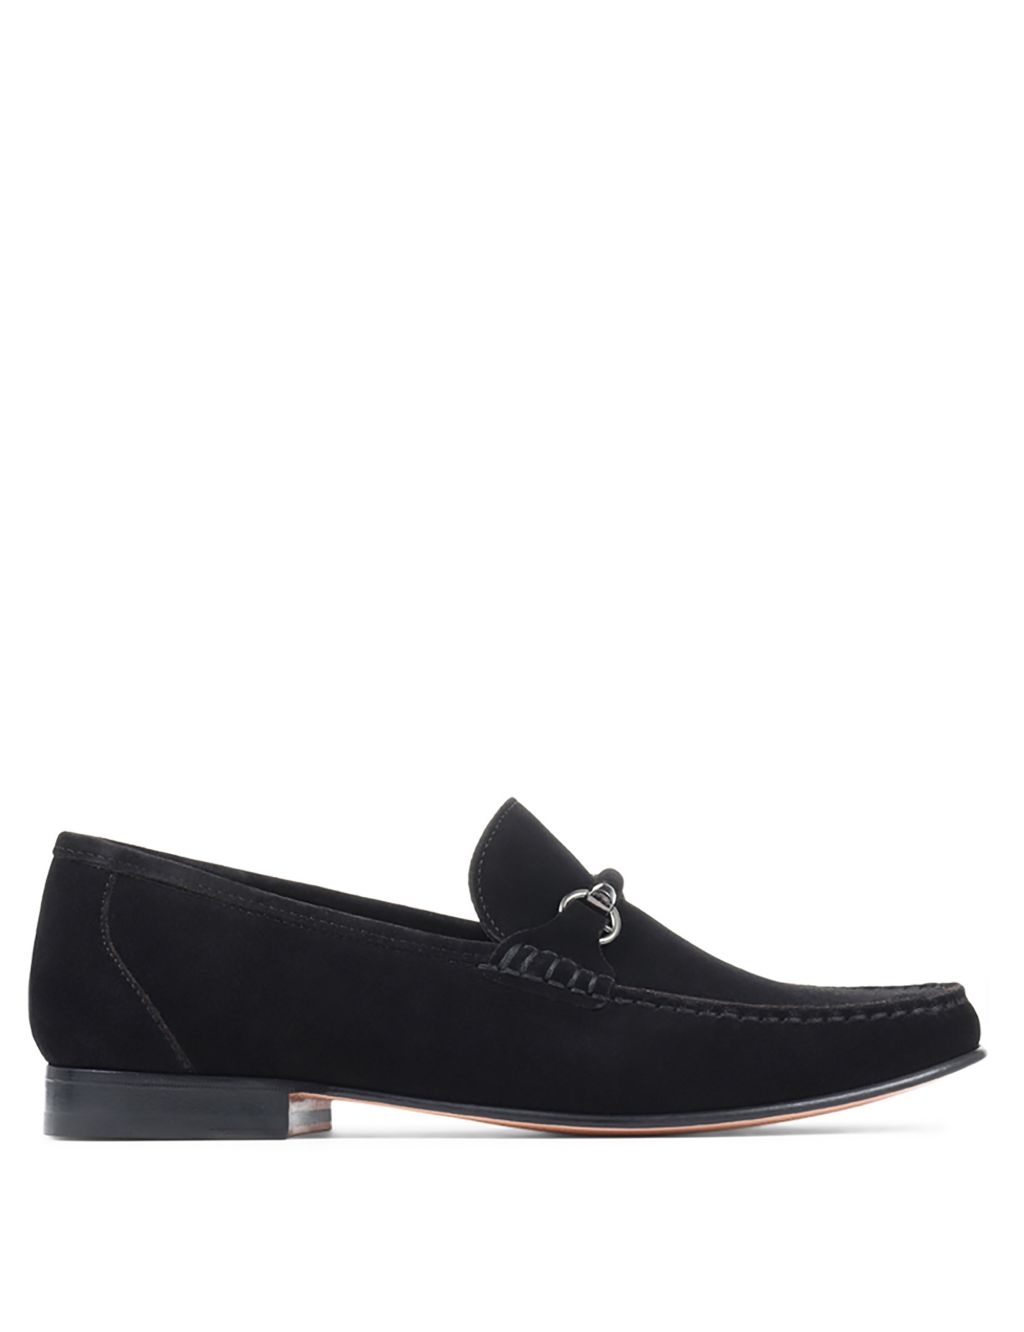 Suede Slip-On Loafers image 2